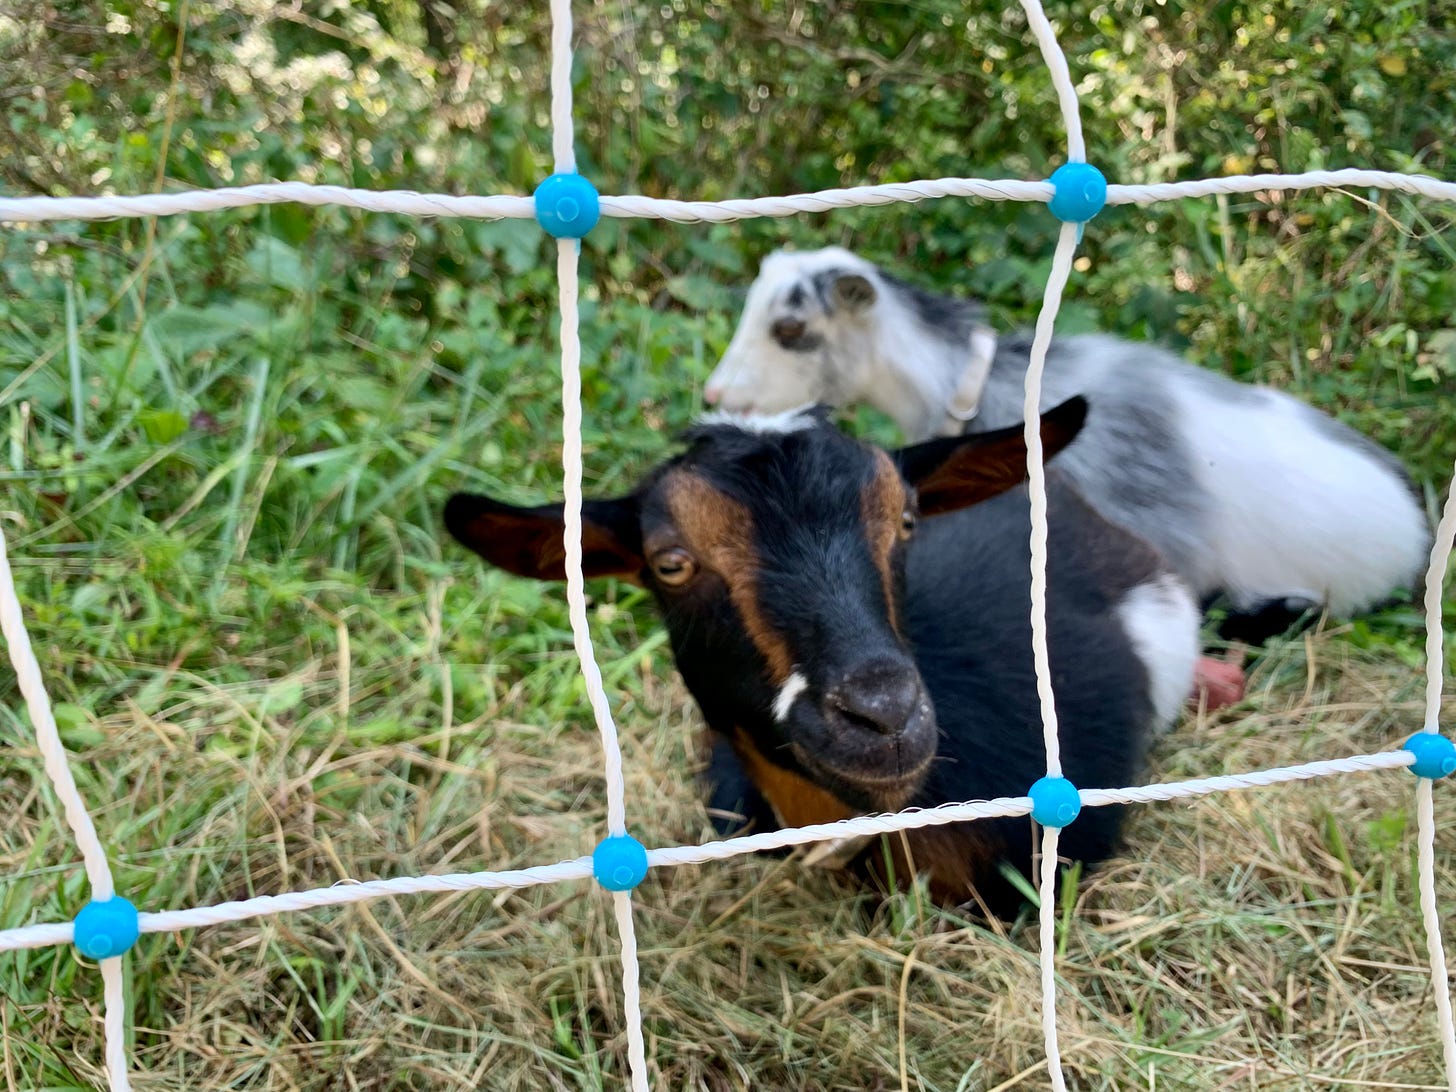 Two goats behind electric mesh fencing